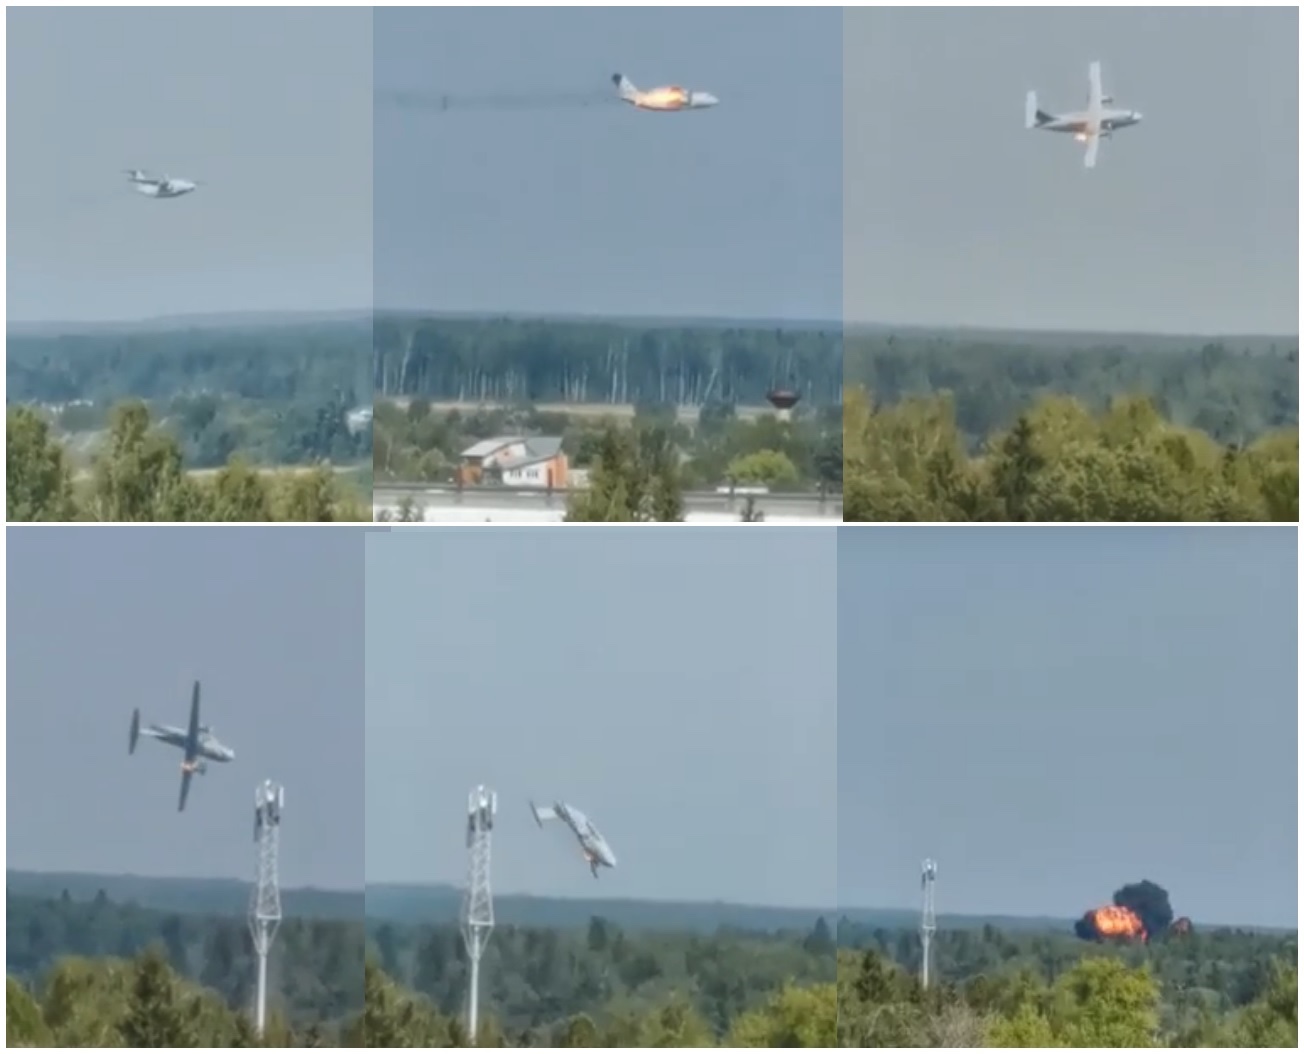 Ilyushin IL-112V prototype catches fire and plummets into the ground during  test flight - Aviation24.be